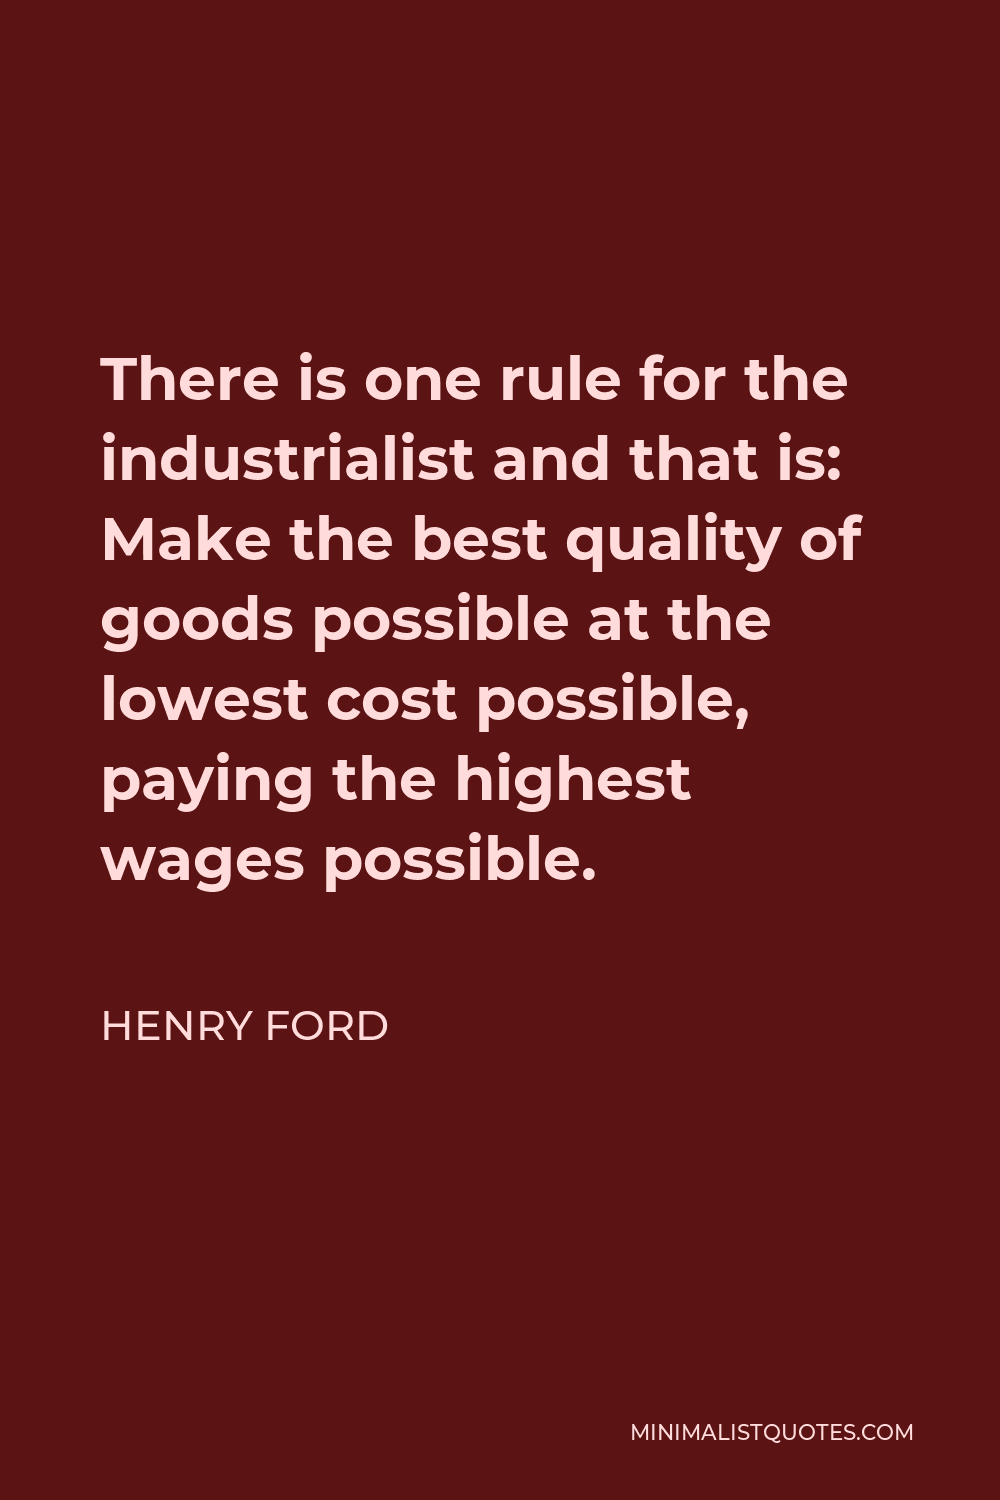 Henry Ford Quote - There is one rule for the industrialist and that is: Make the best quality of goods possible at the lowest cost possible, paying the highest wages possible.